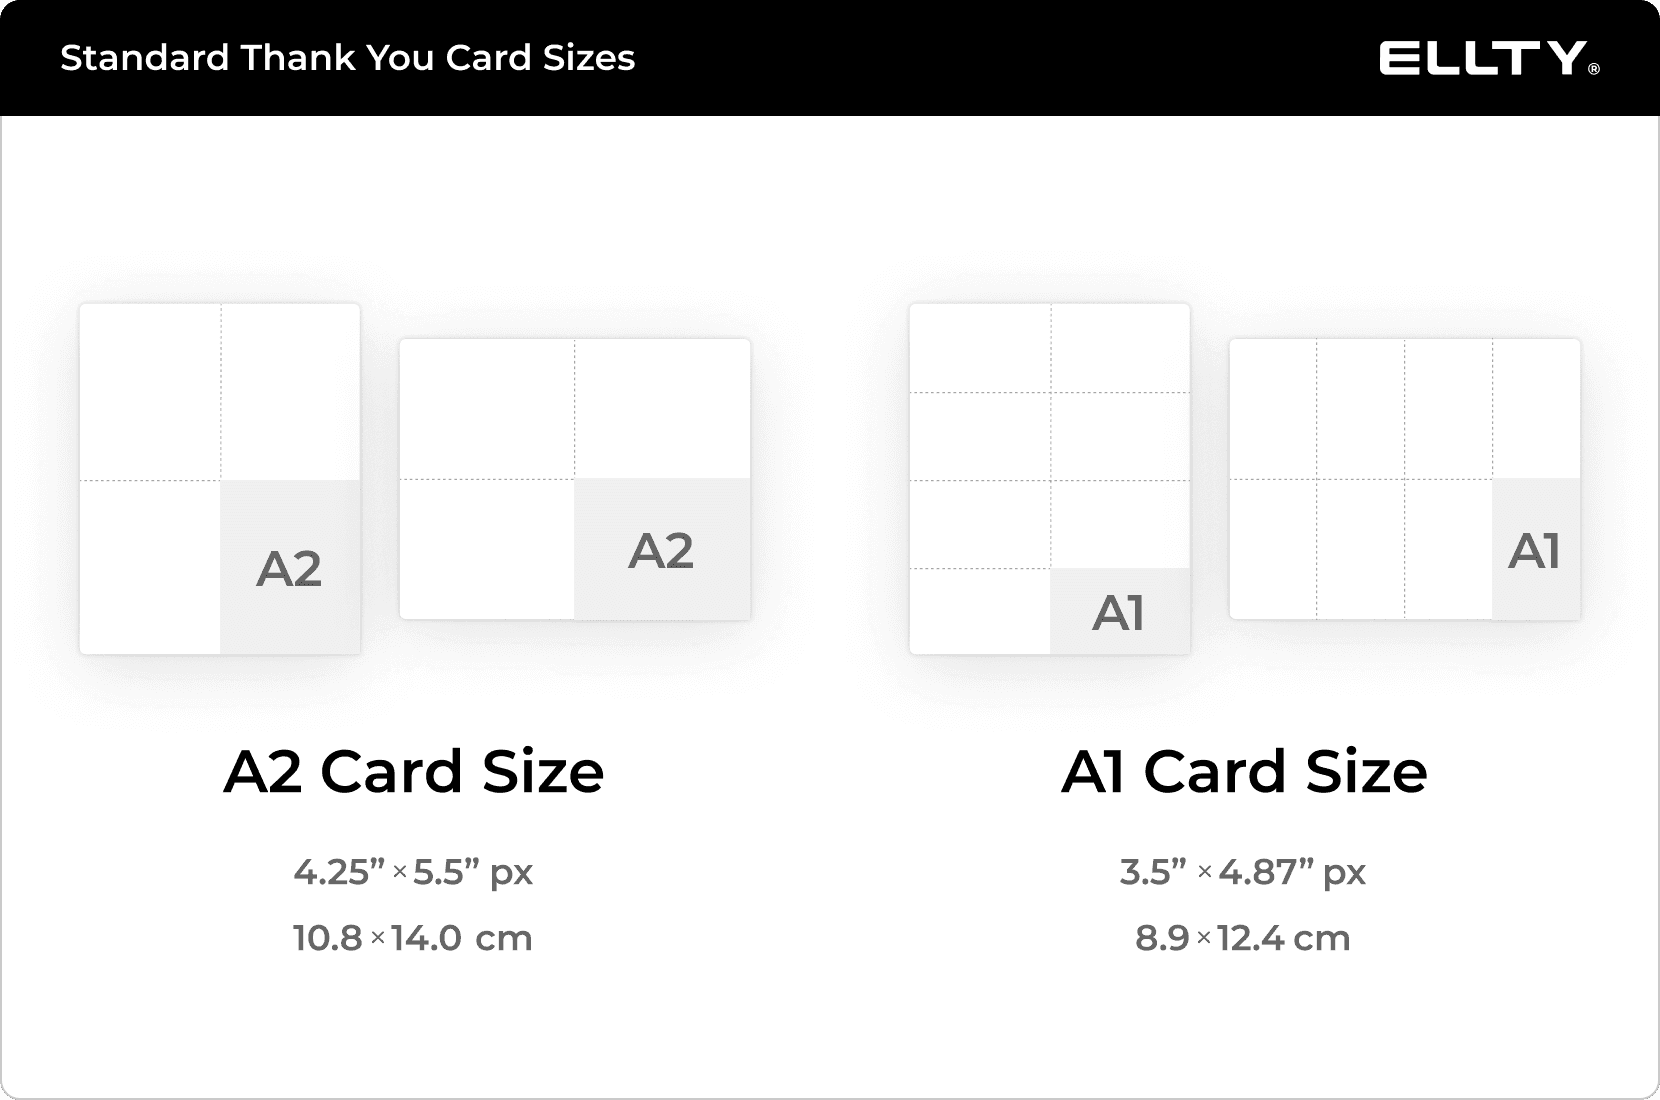 Standard Thank You Card Size Guide